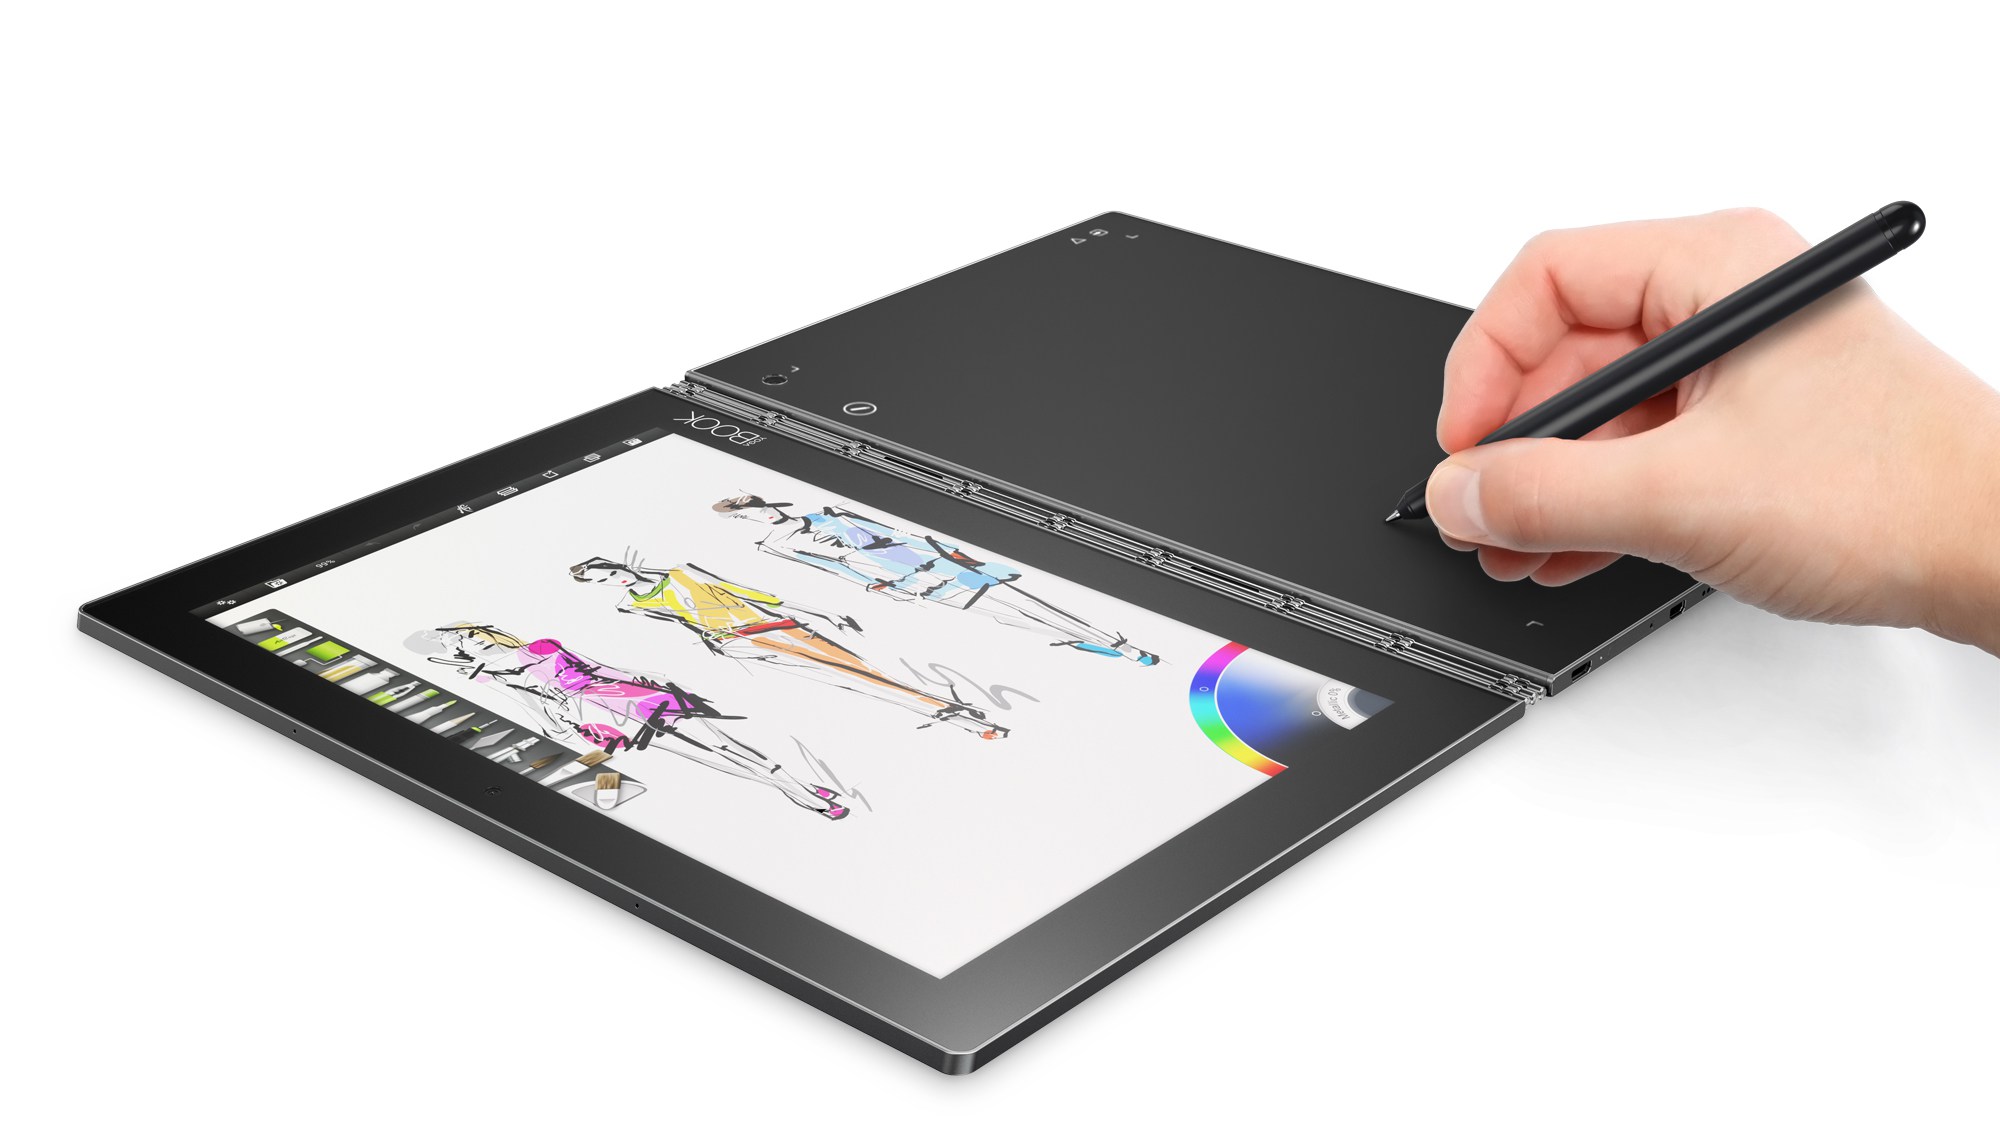 Lenovo Yoga Book running Android and Windows